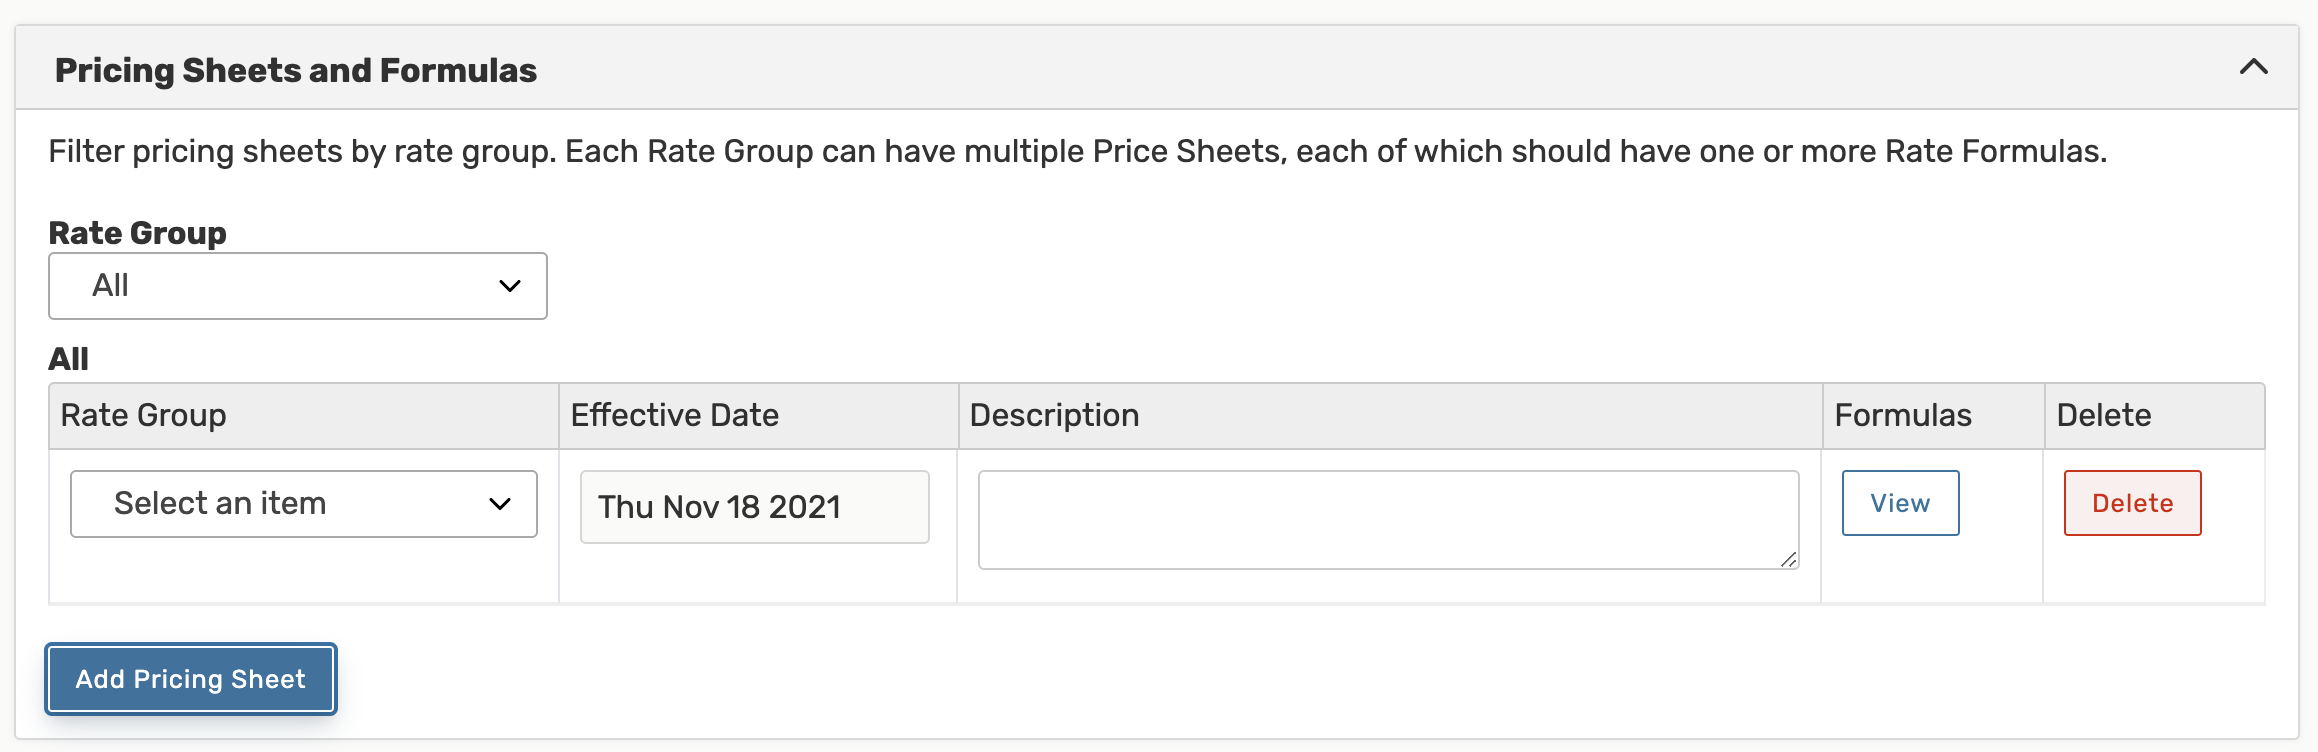 Pricing Sheet Details in 25Live